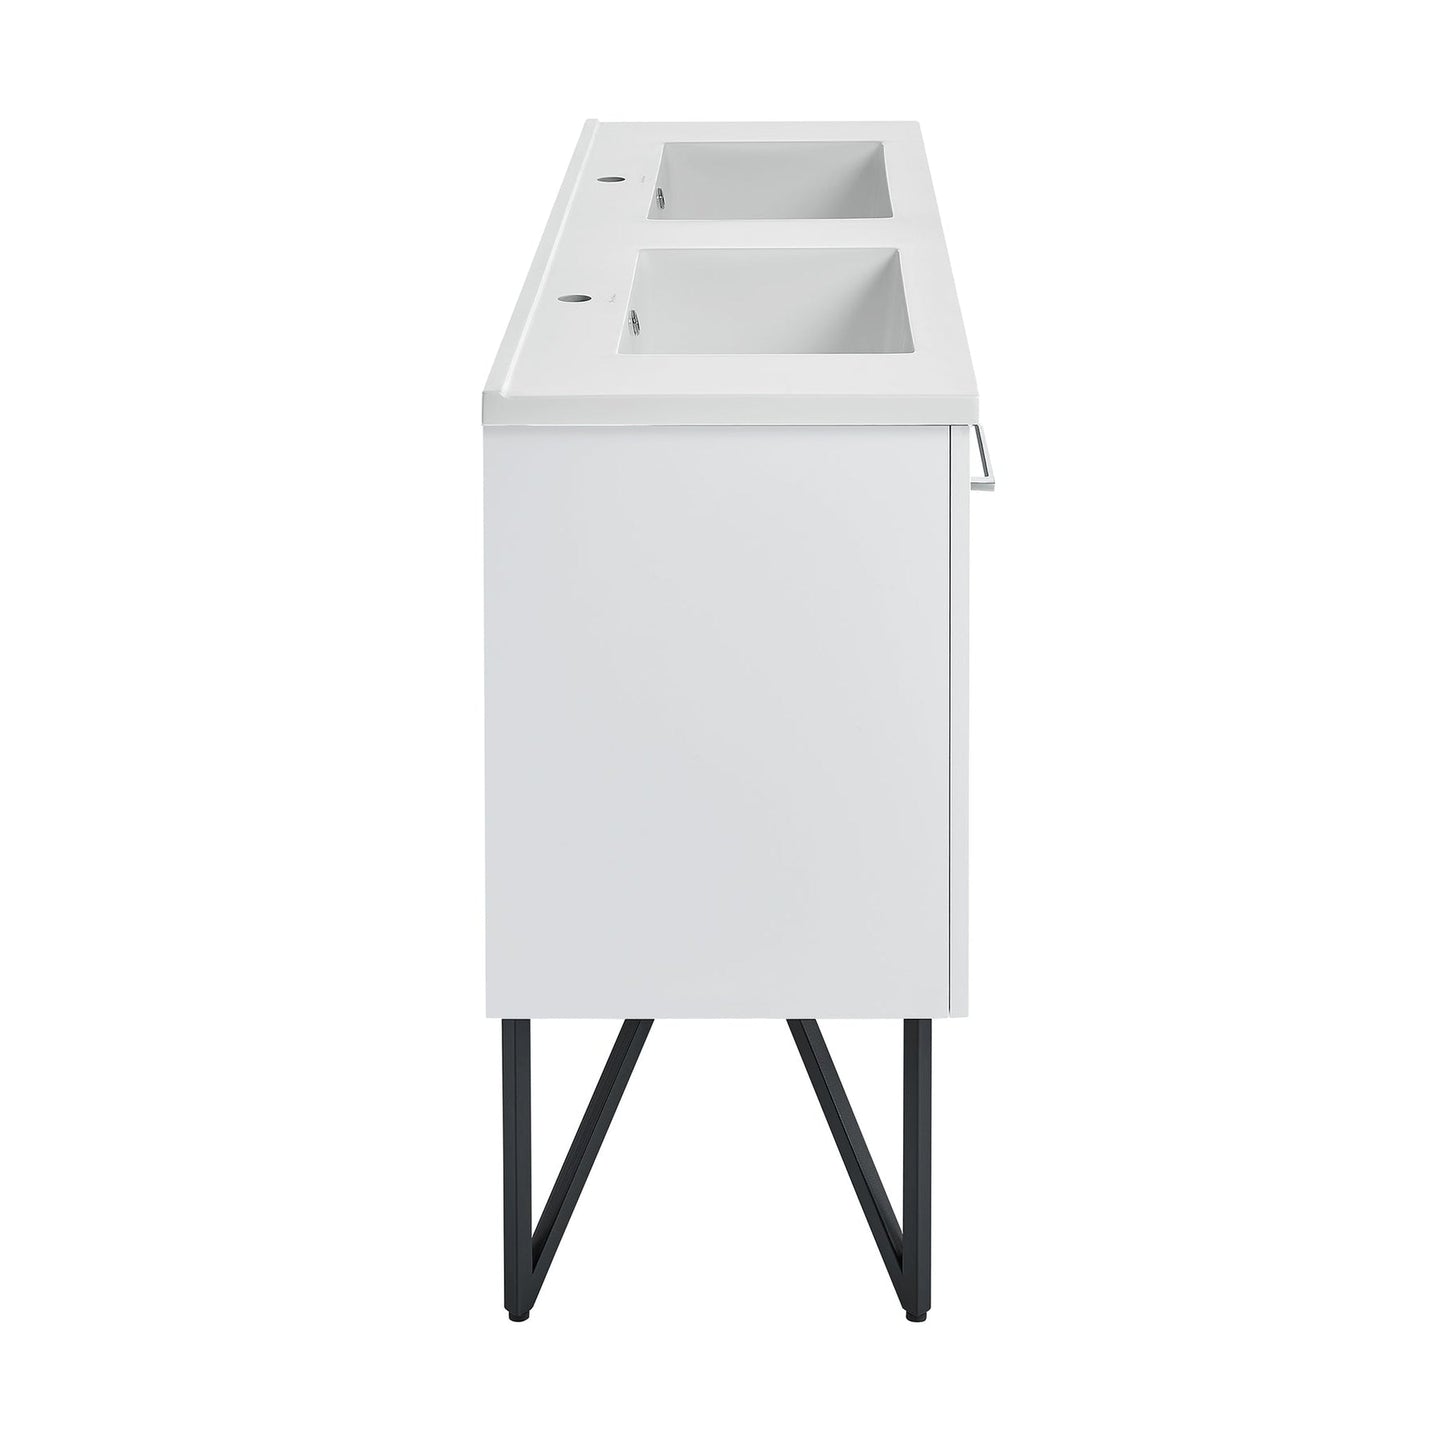 Swiss Madison Annecy 60" x 36" Freestanding White Bathroom Vanity With Ceramic Double Sink and Stainless Steel Metal Legs